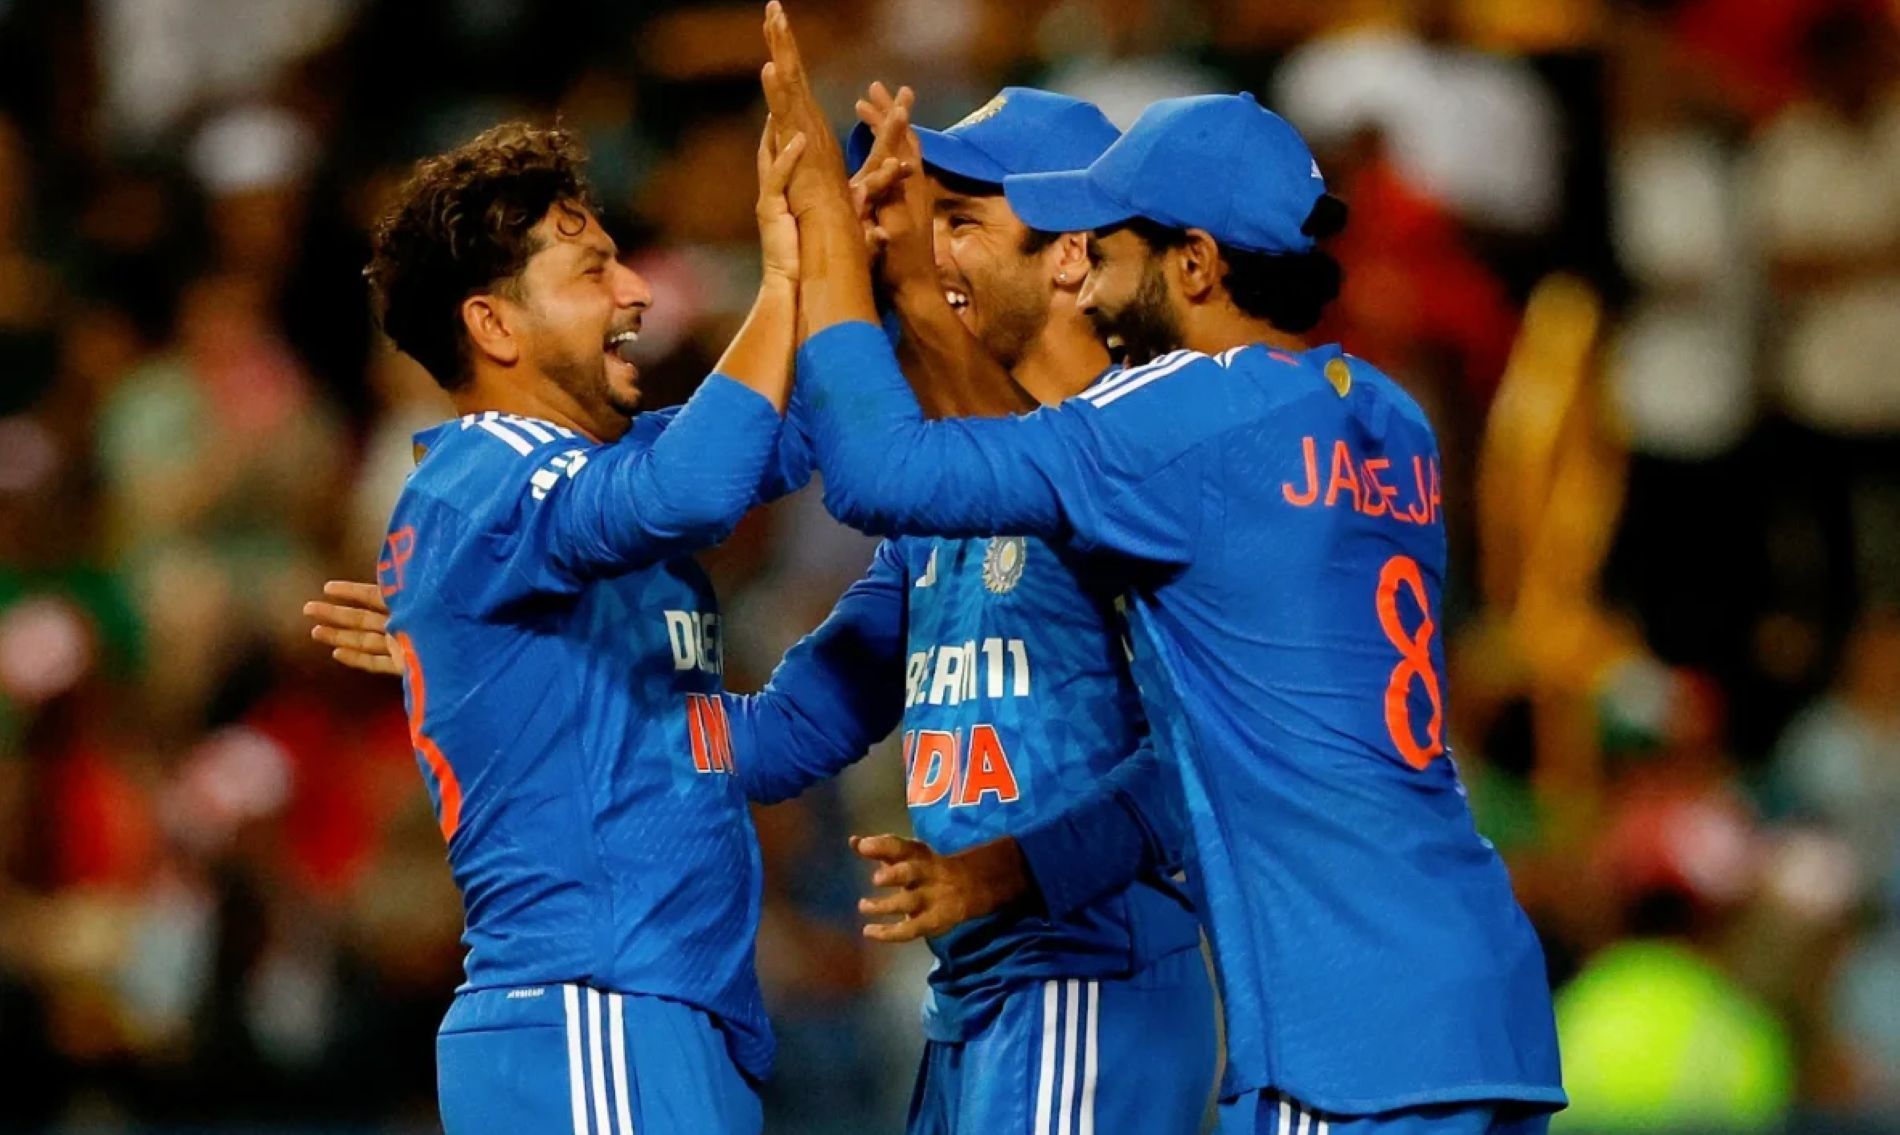 Kuldeep enjoyed a field day against the South African batters in the final T20I.